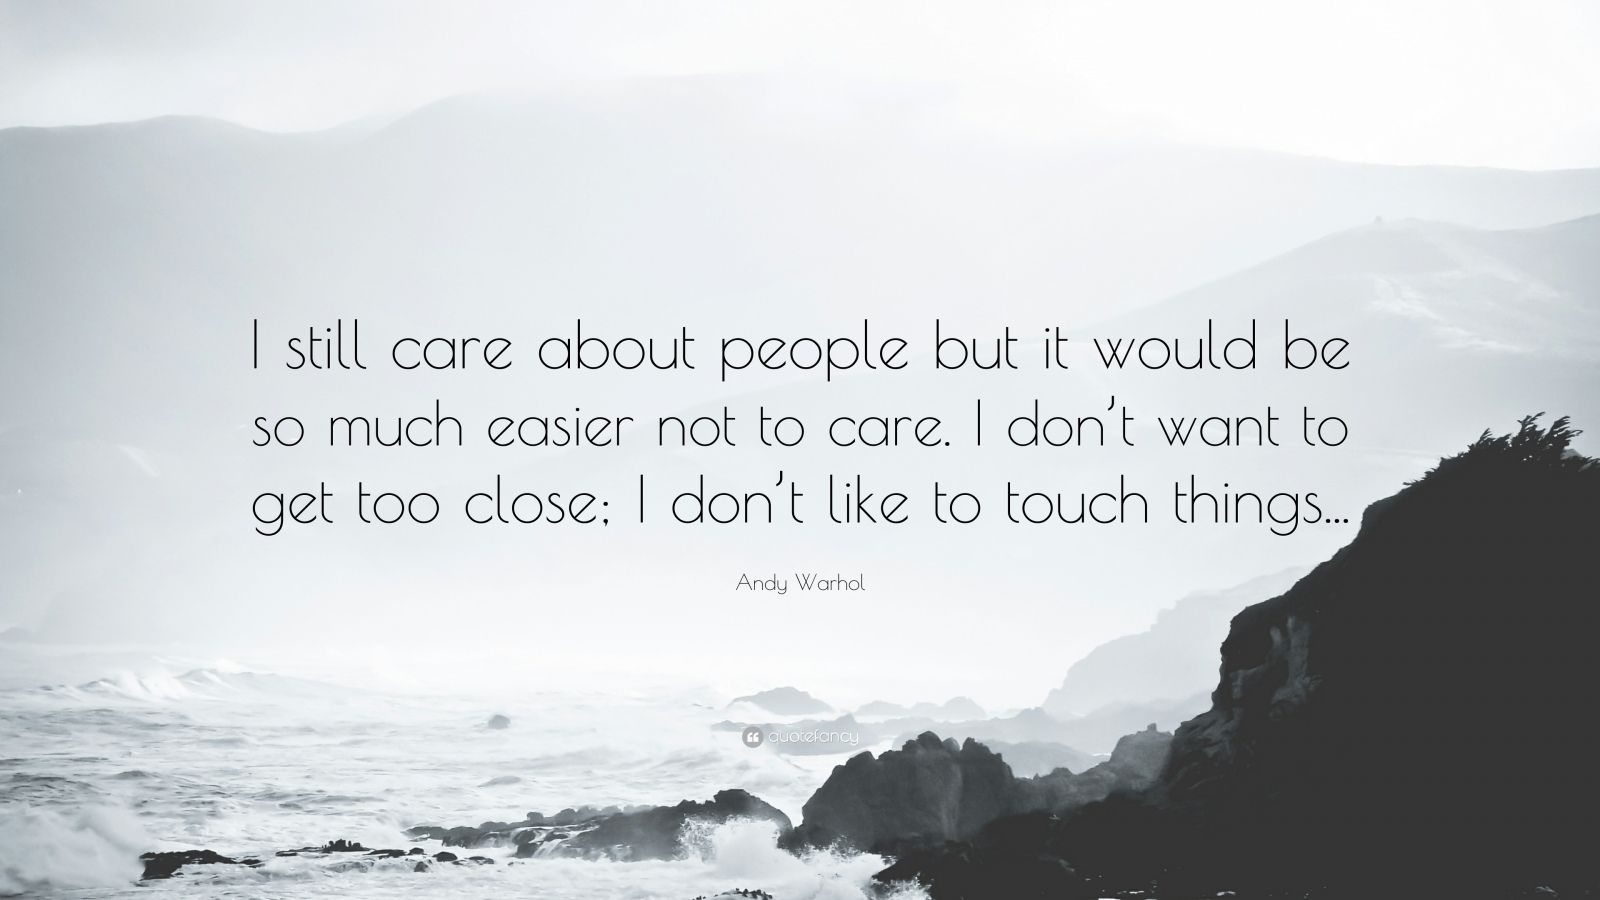 andy warhol quote: "i still care about people but it would be so